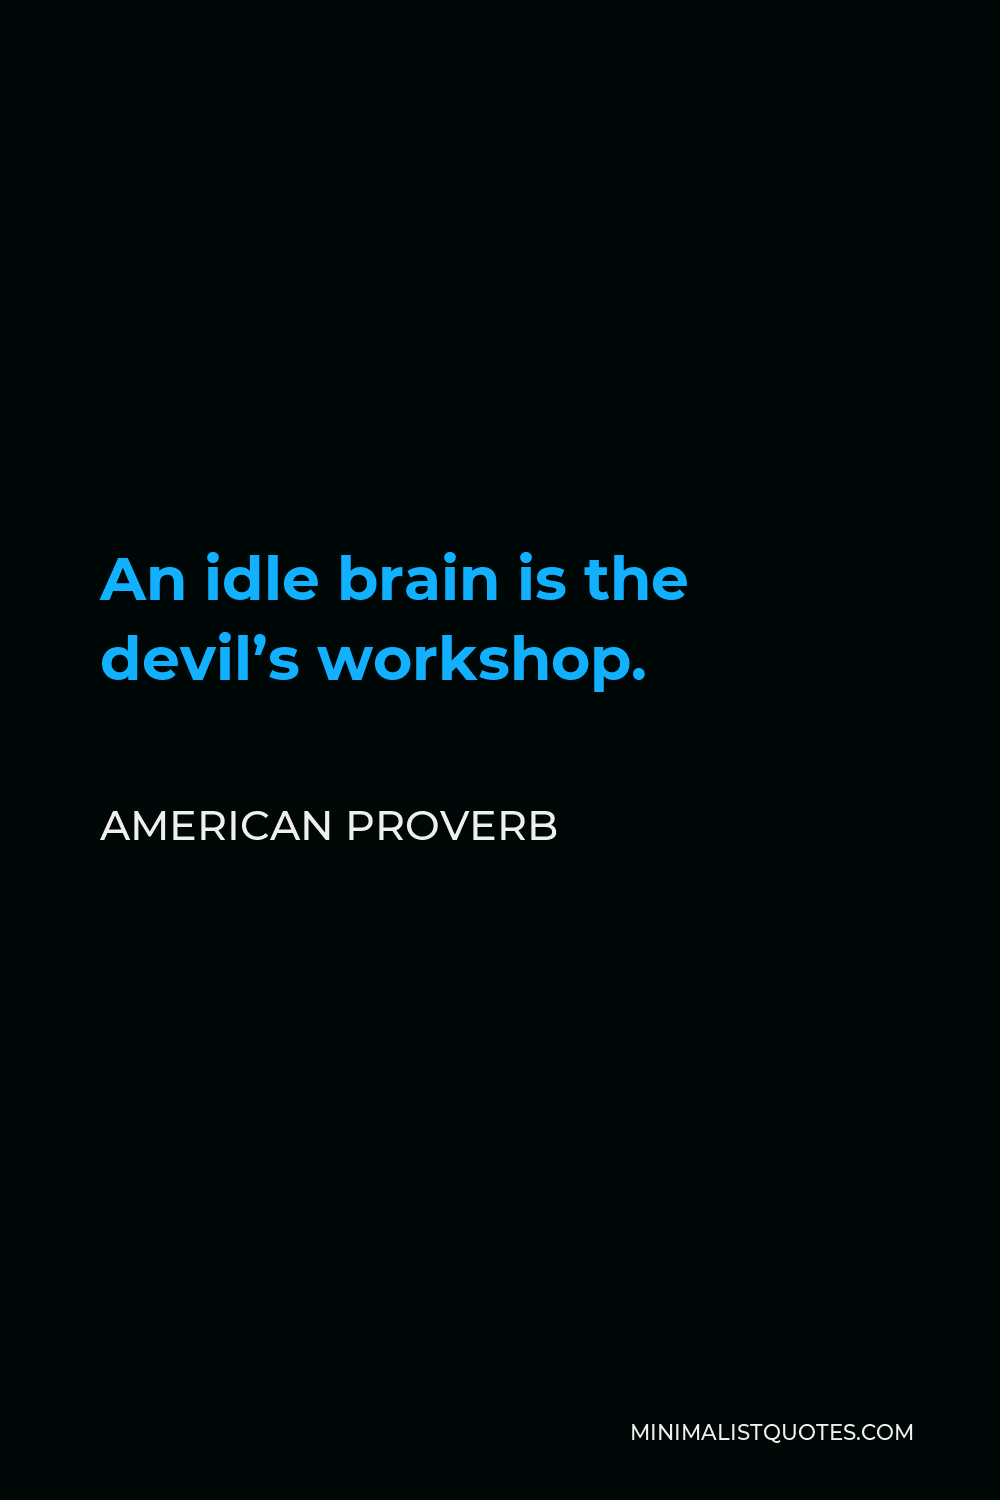 American Proverb Quote - An idle brain is the devil’s workshop.